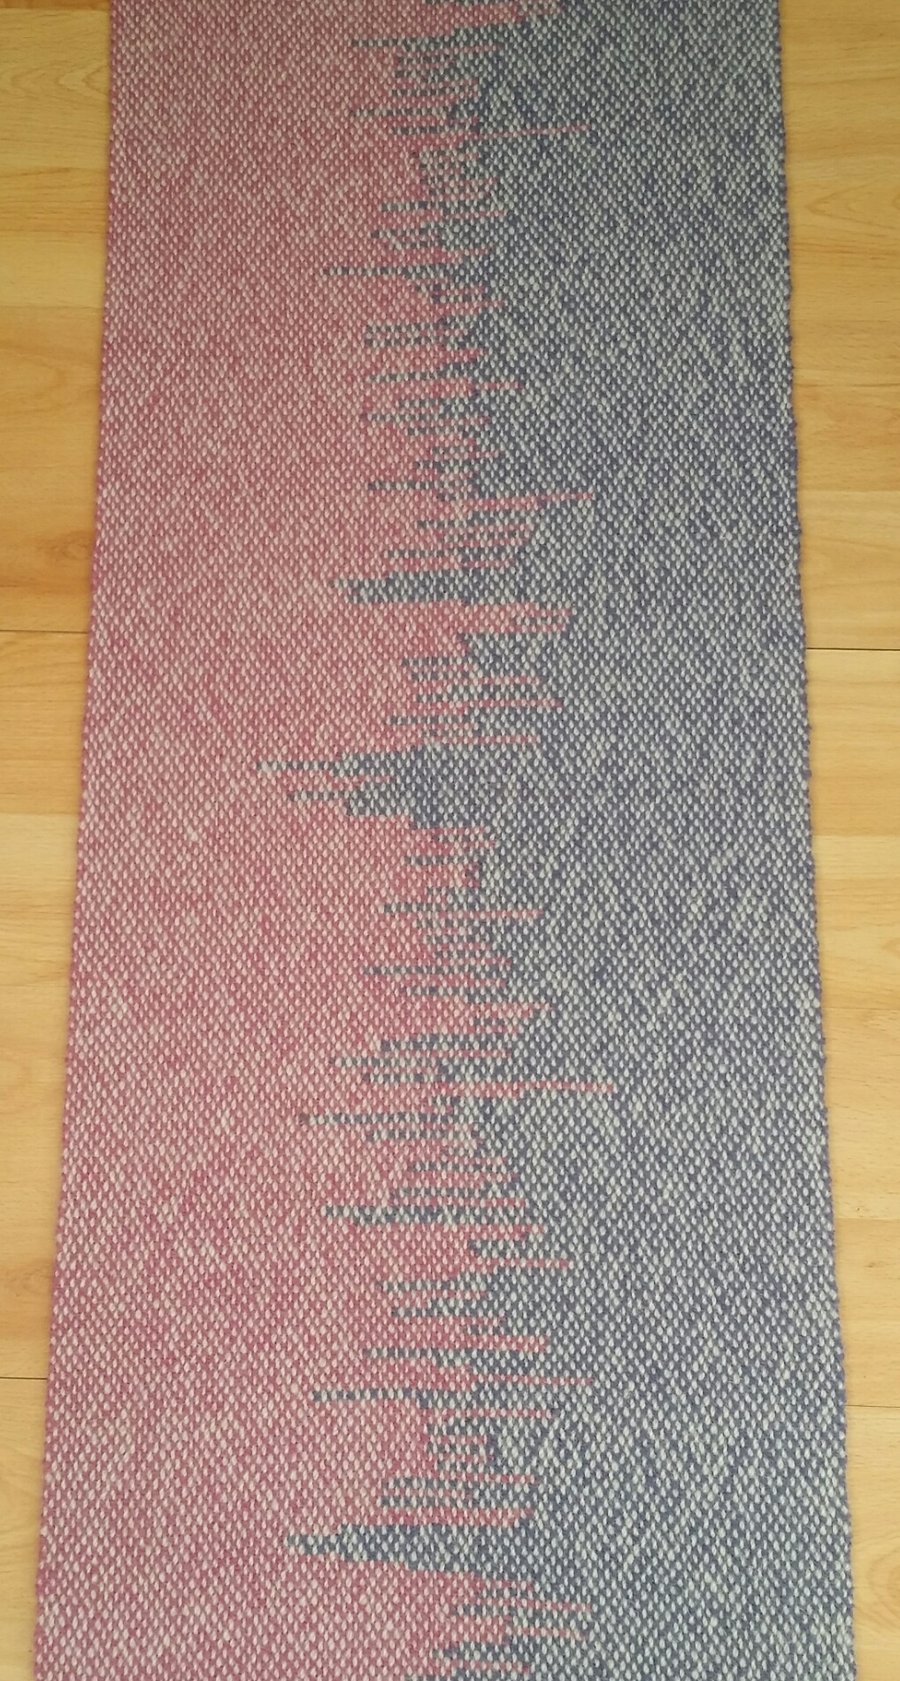  Hand Woven Rug - Pink and lilac